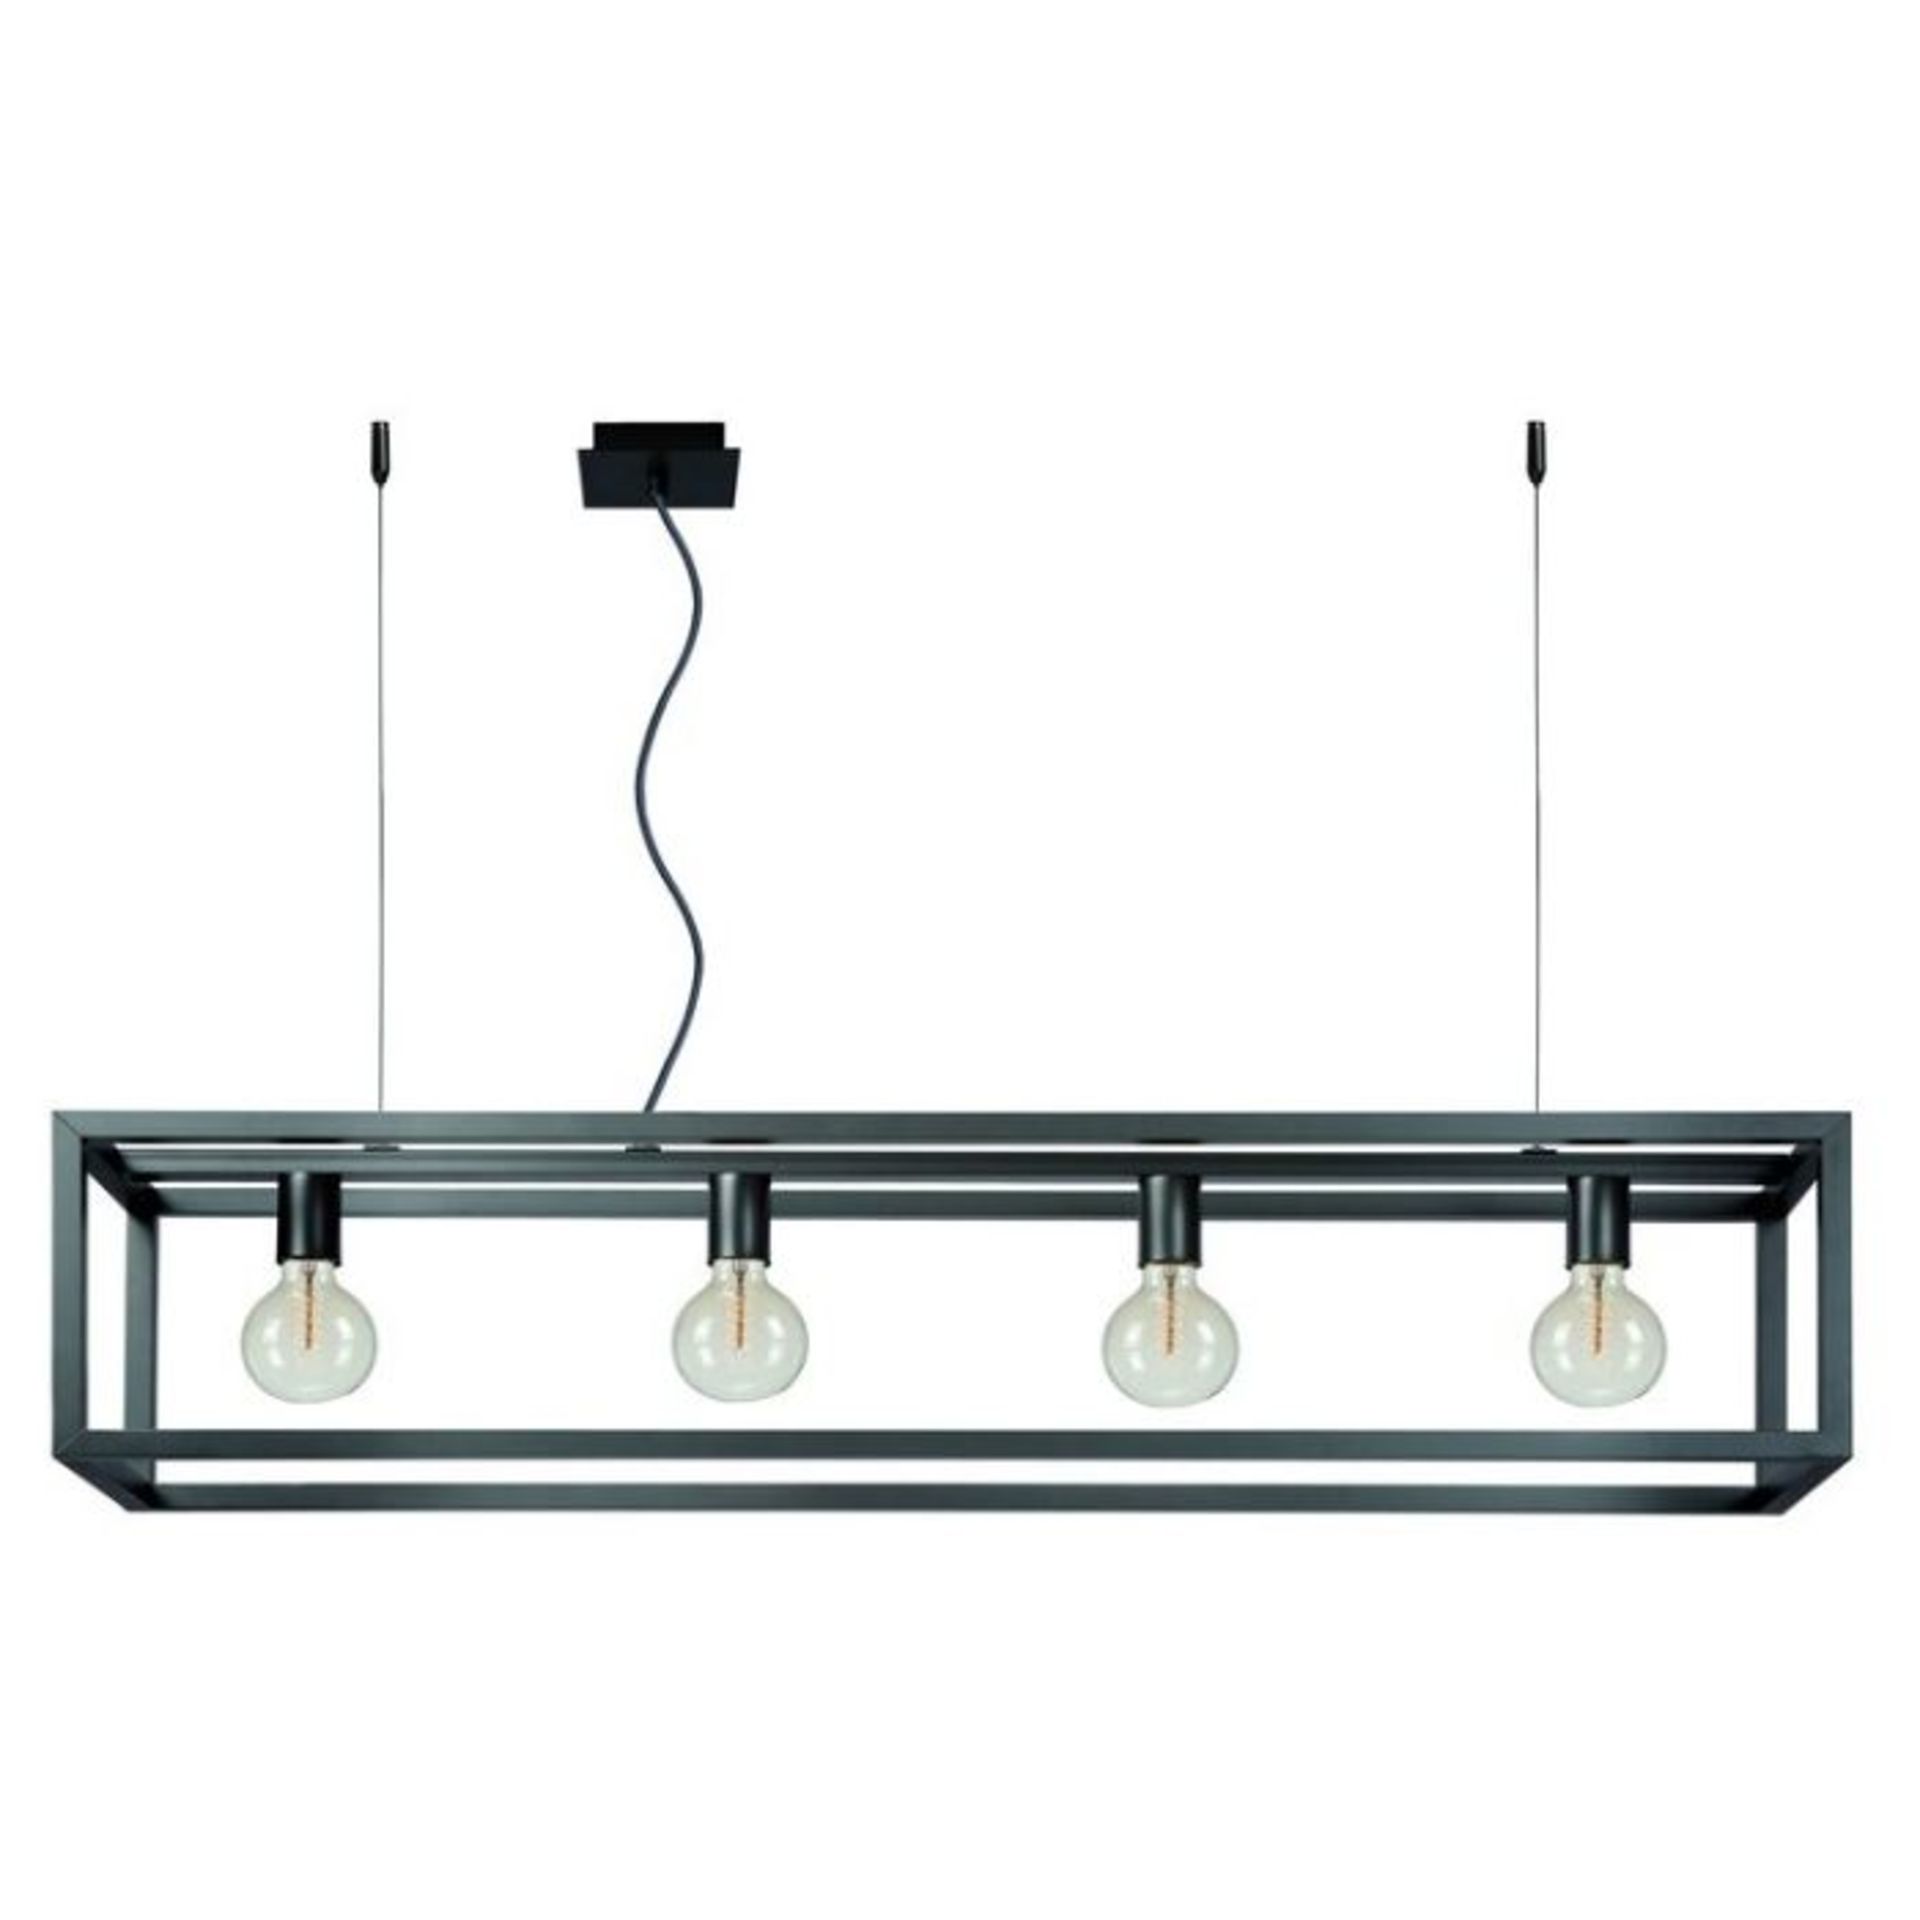 Lucide, 4-Light Kitchen Island Pendant (METALLIC COPPER / BULBS NOT INCLUDED) RRP - £205.99 (